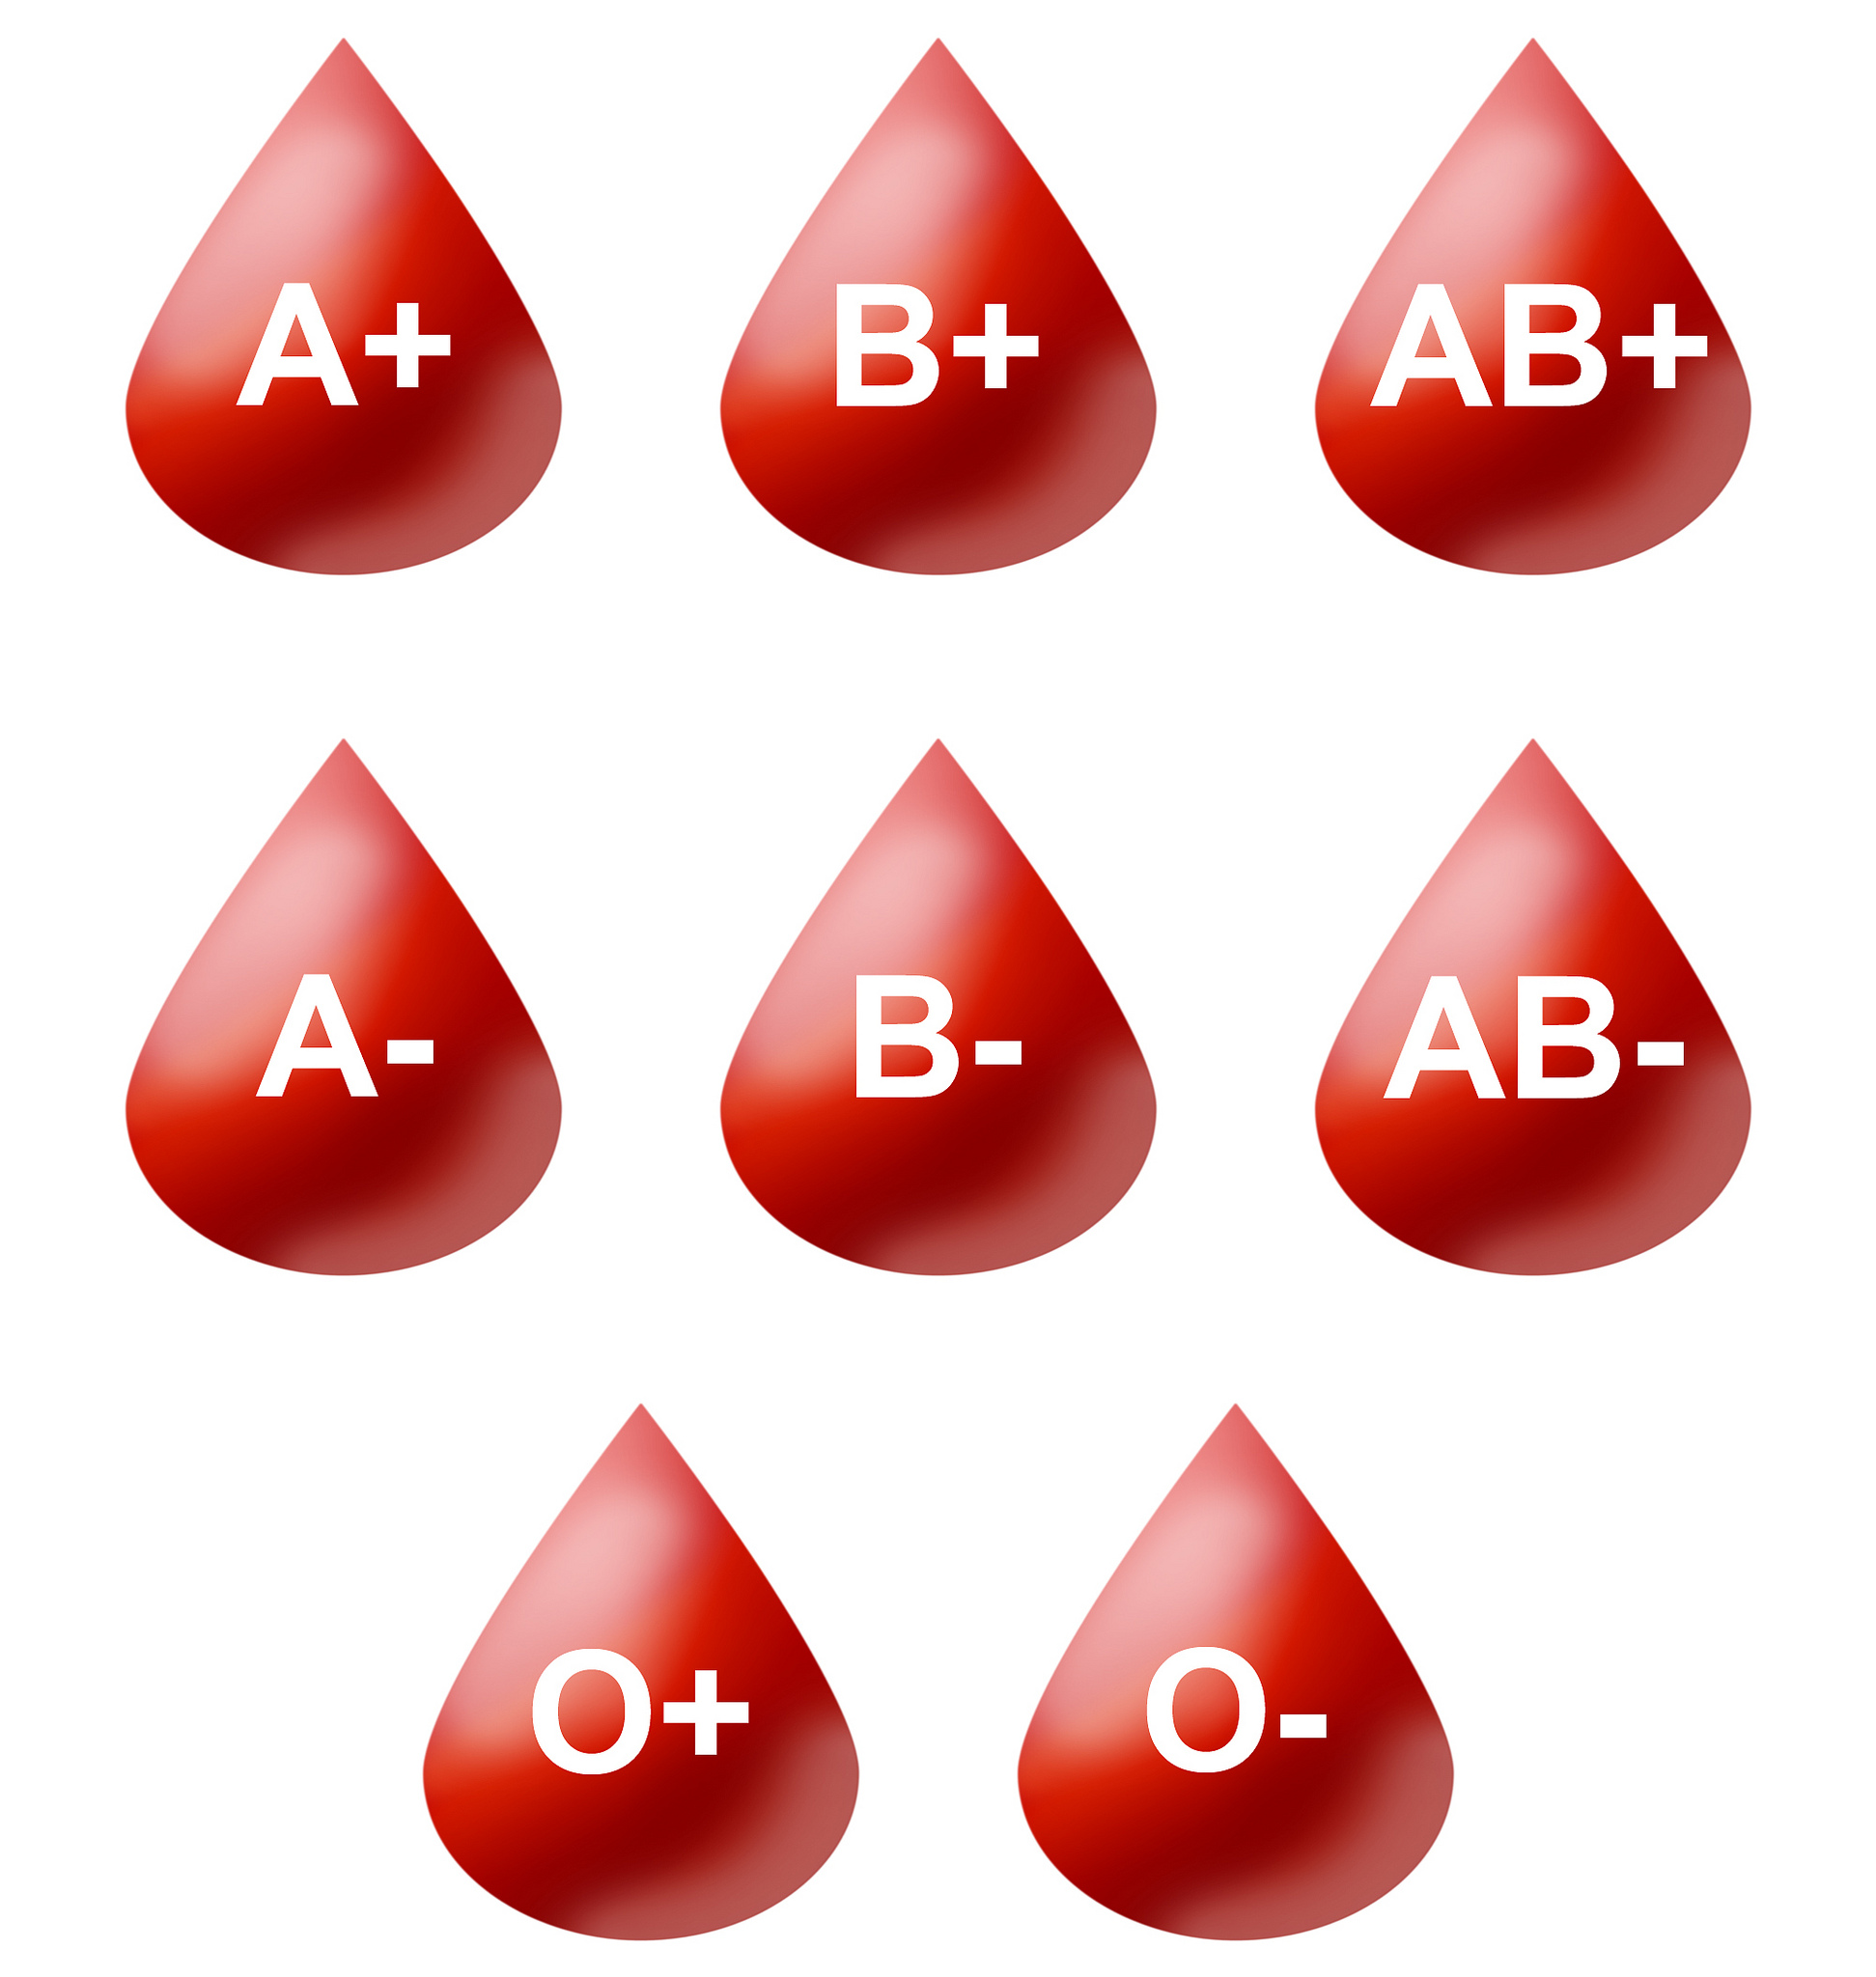 understanding-different-blood-types-curious